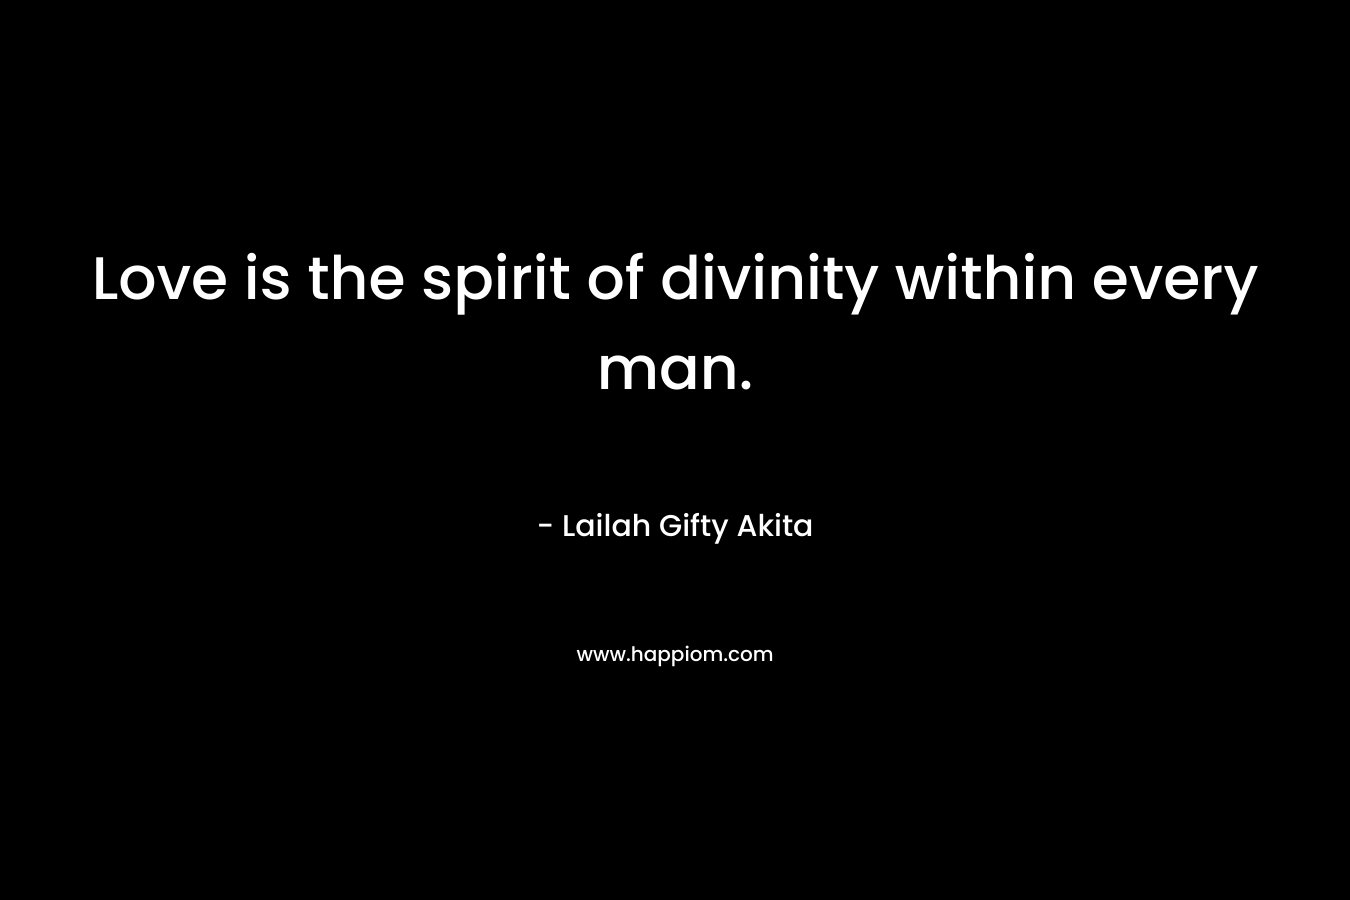 Love is the spirit of divinity within every man.